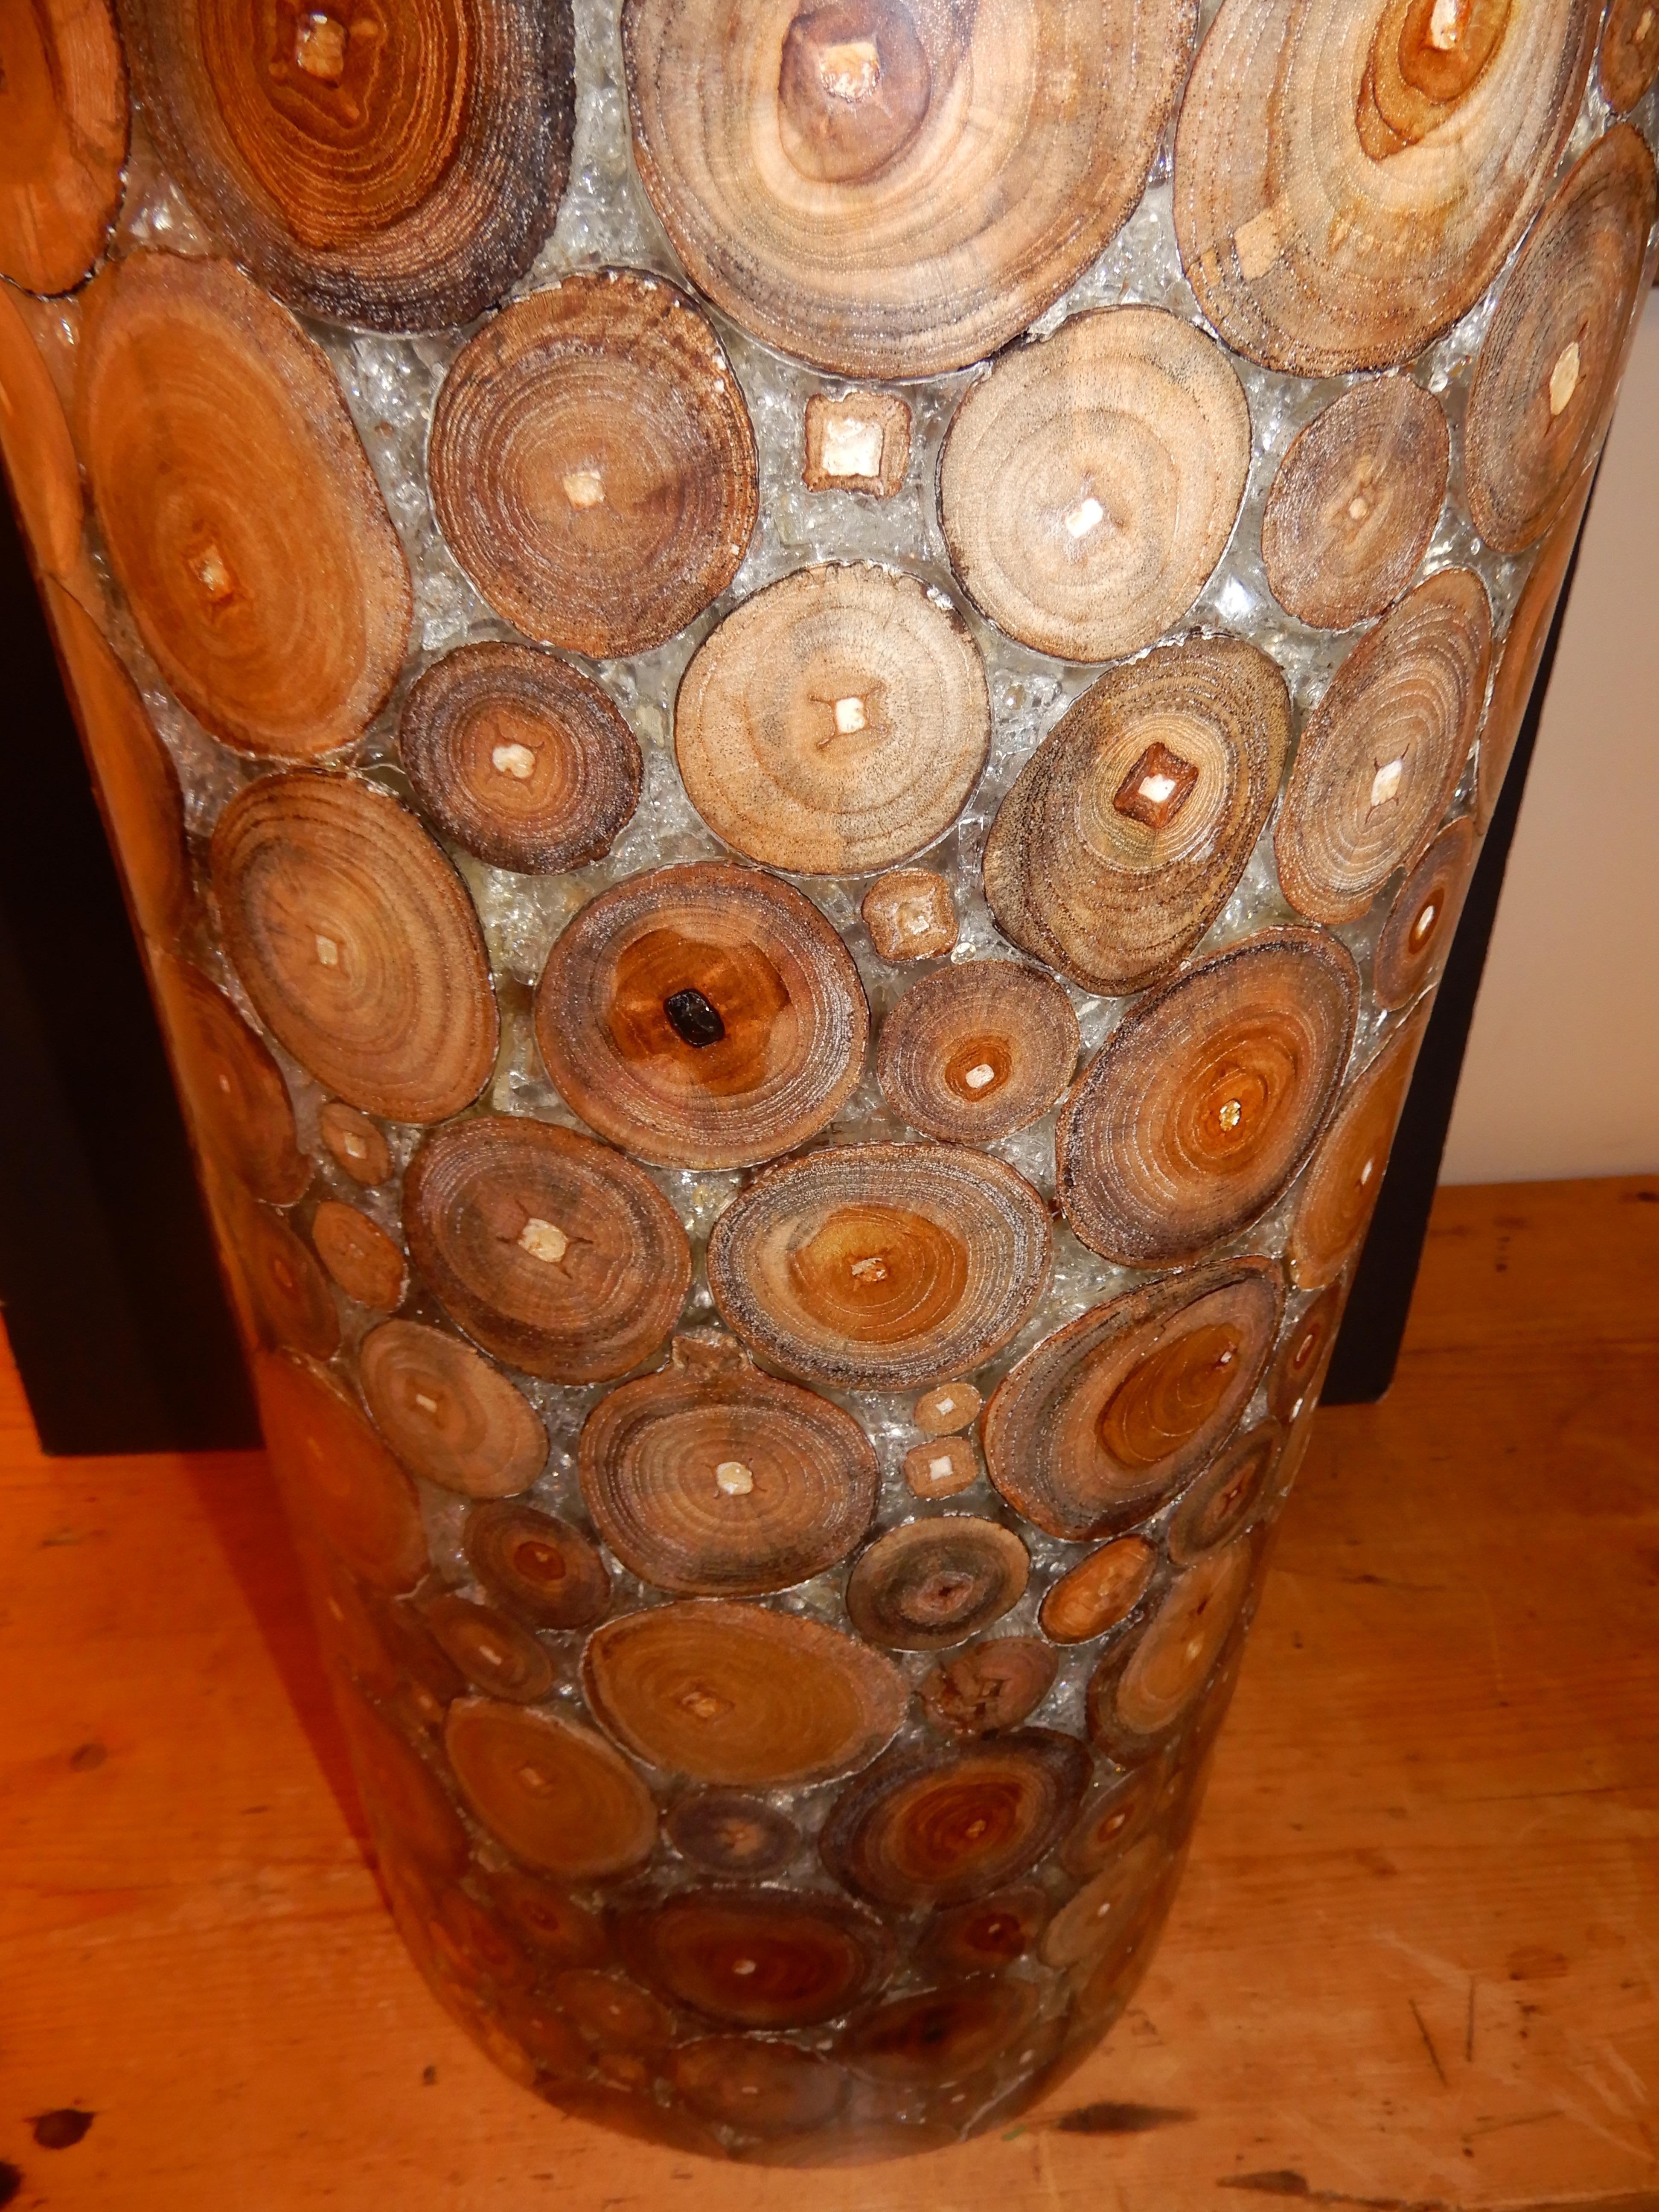 A rare find in this artisan crafted exotic woods, and crystallized Lucite umbrella stand, or floral displays.